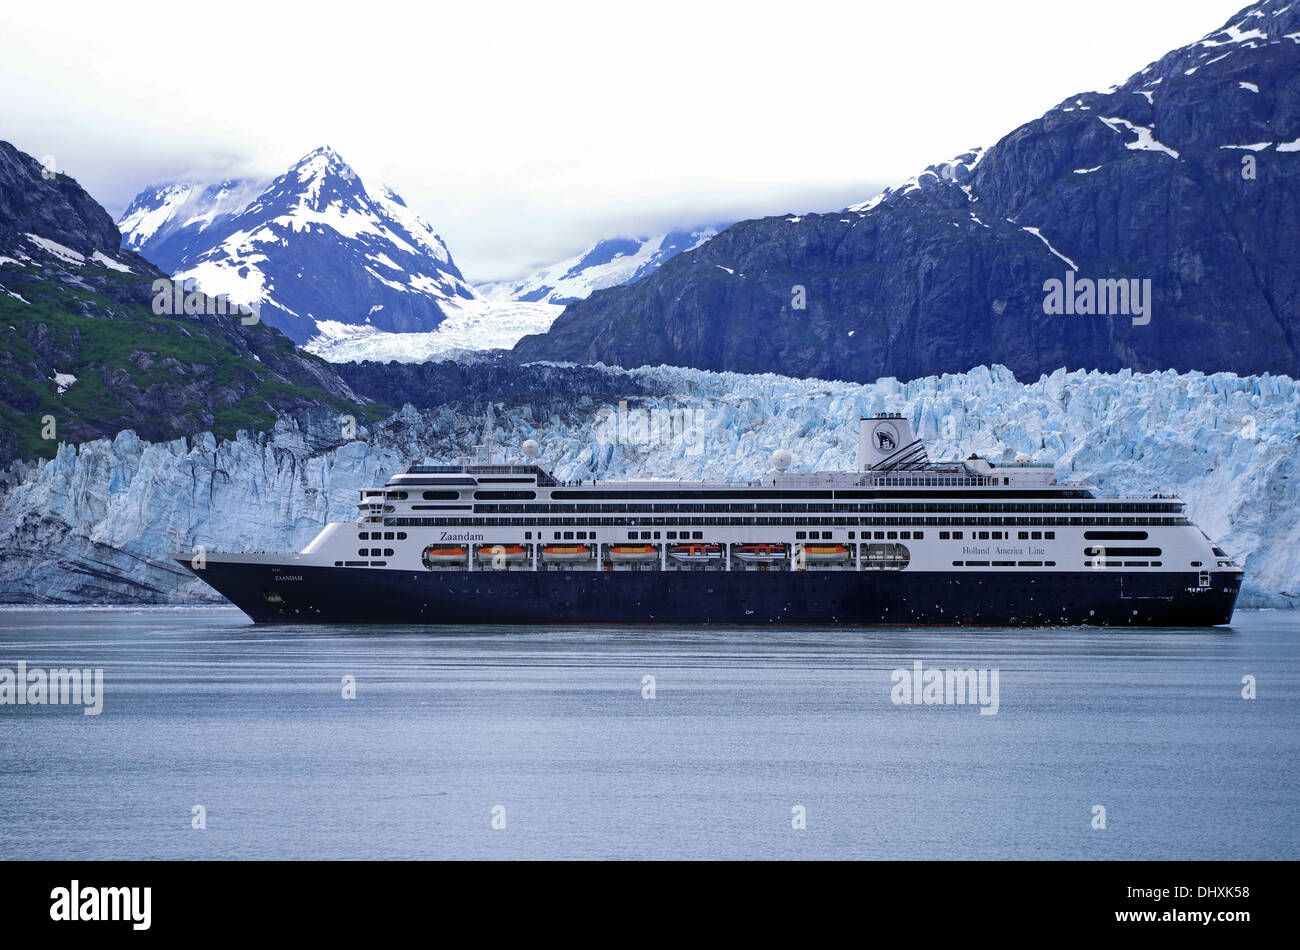 Cruise ship in front of a tidal glacier Stock Photo